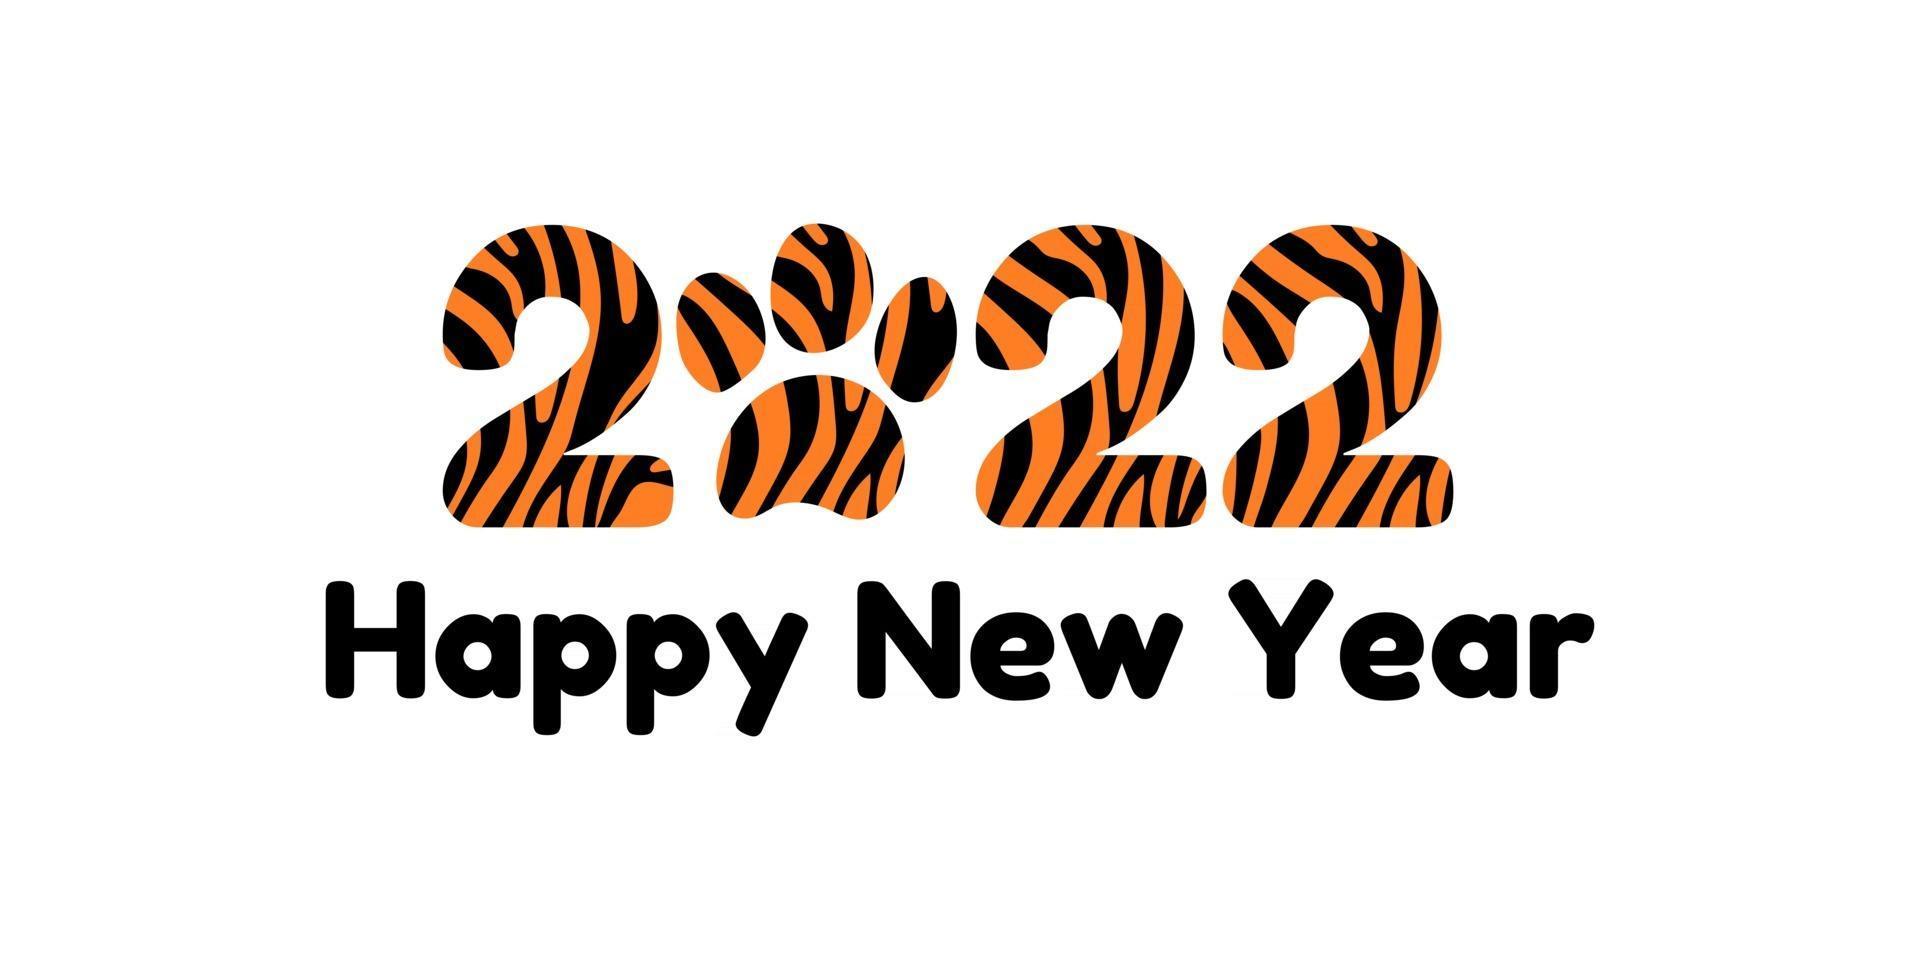 Happy New Year 2022 Banner Or Postcard With Year Of The Tiger With Paw